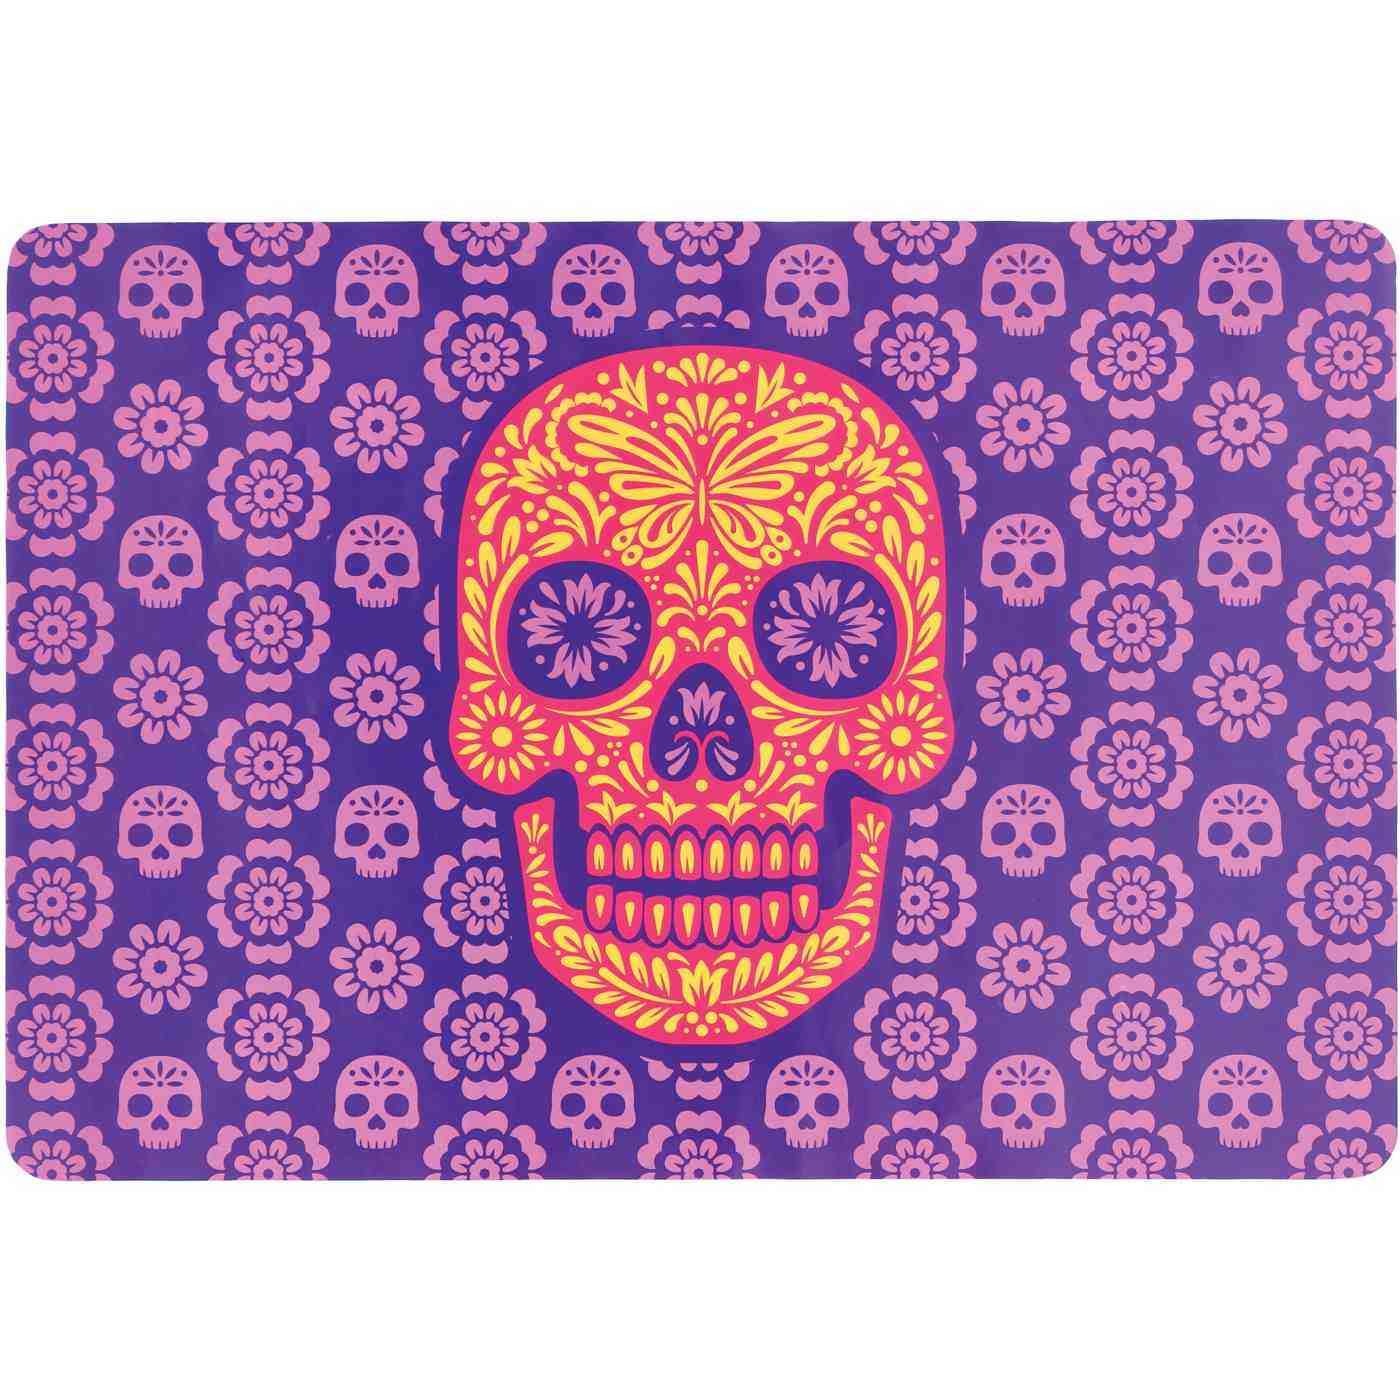 Destination Holiday Day of the Dead Calavera Dual Sided Placemat; image 1 of 2